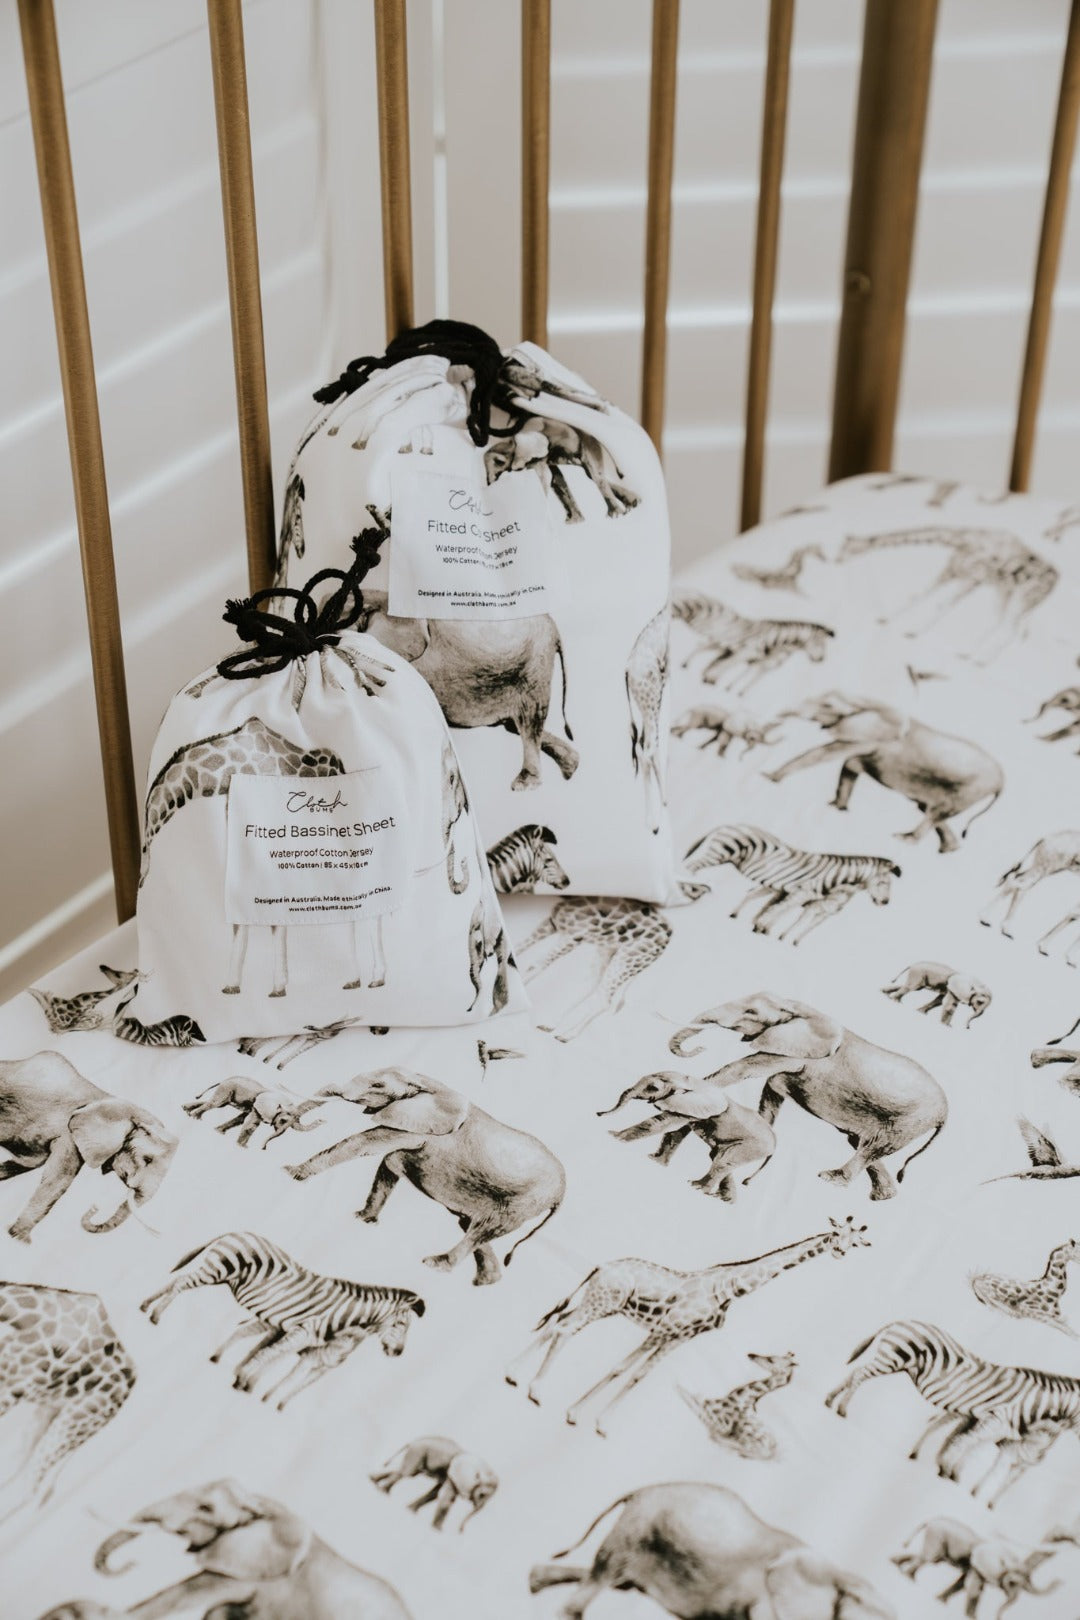 Waterproof Cot Sheet with Monochrome Afrcian Animals Printed on the sheet